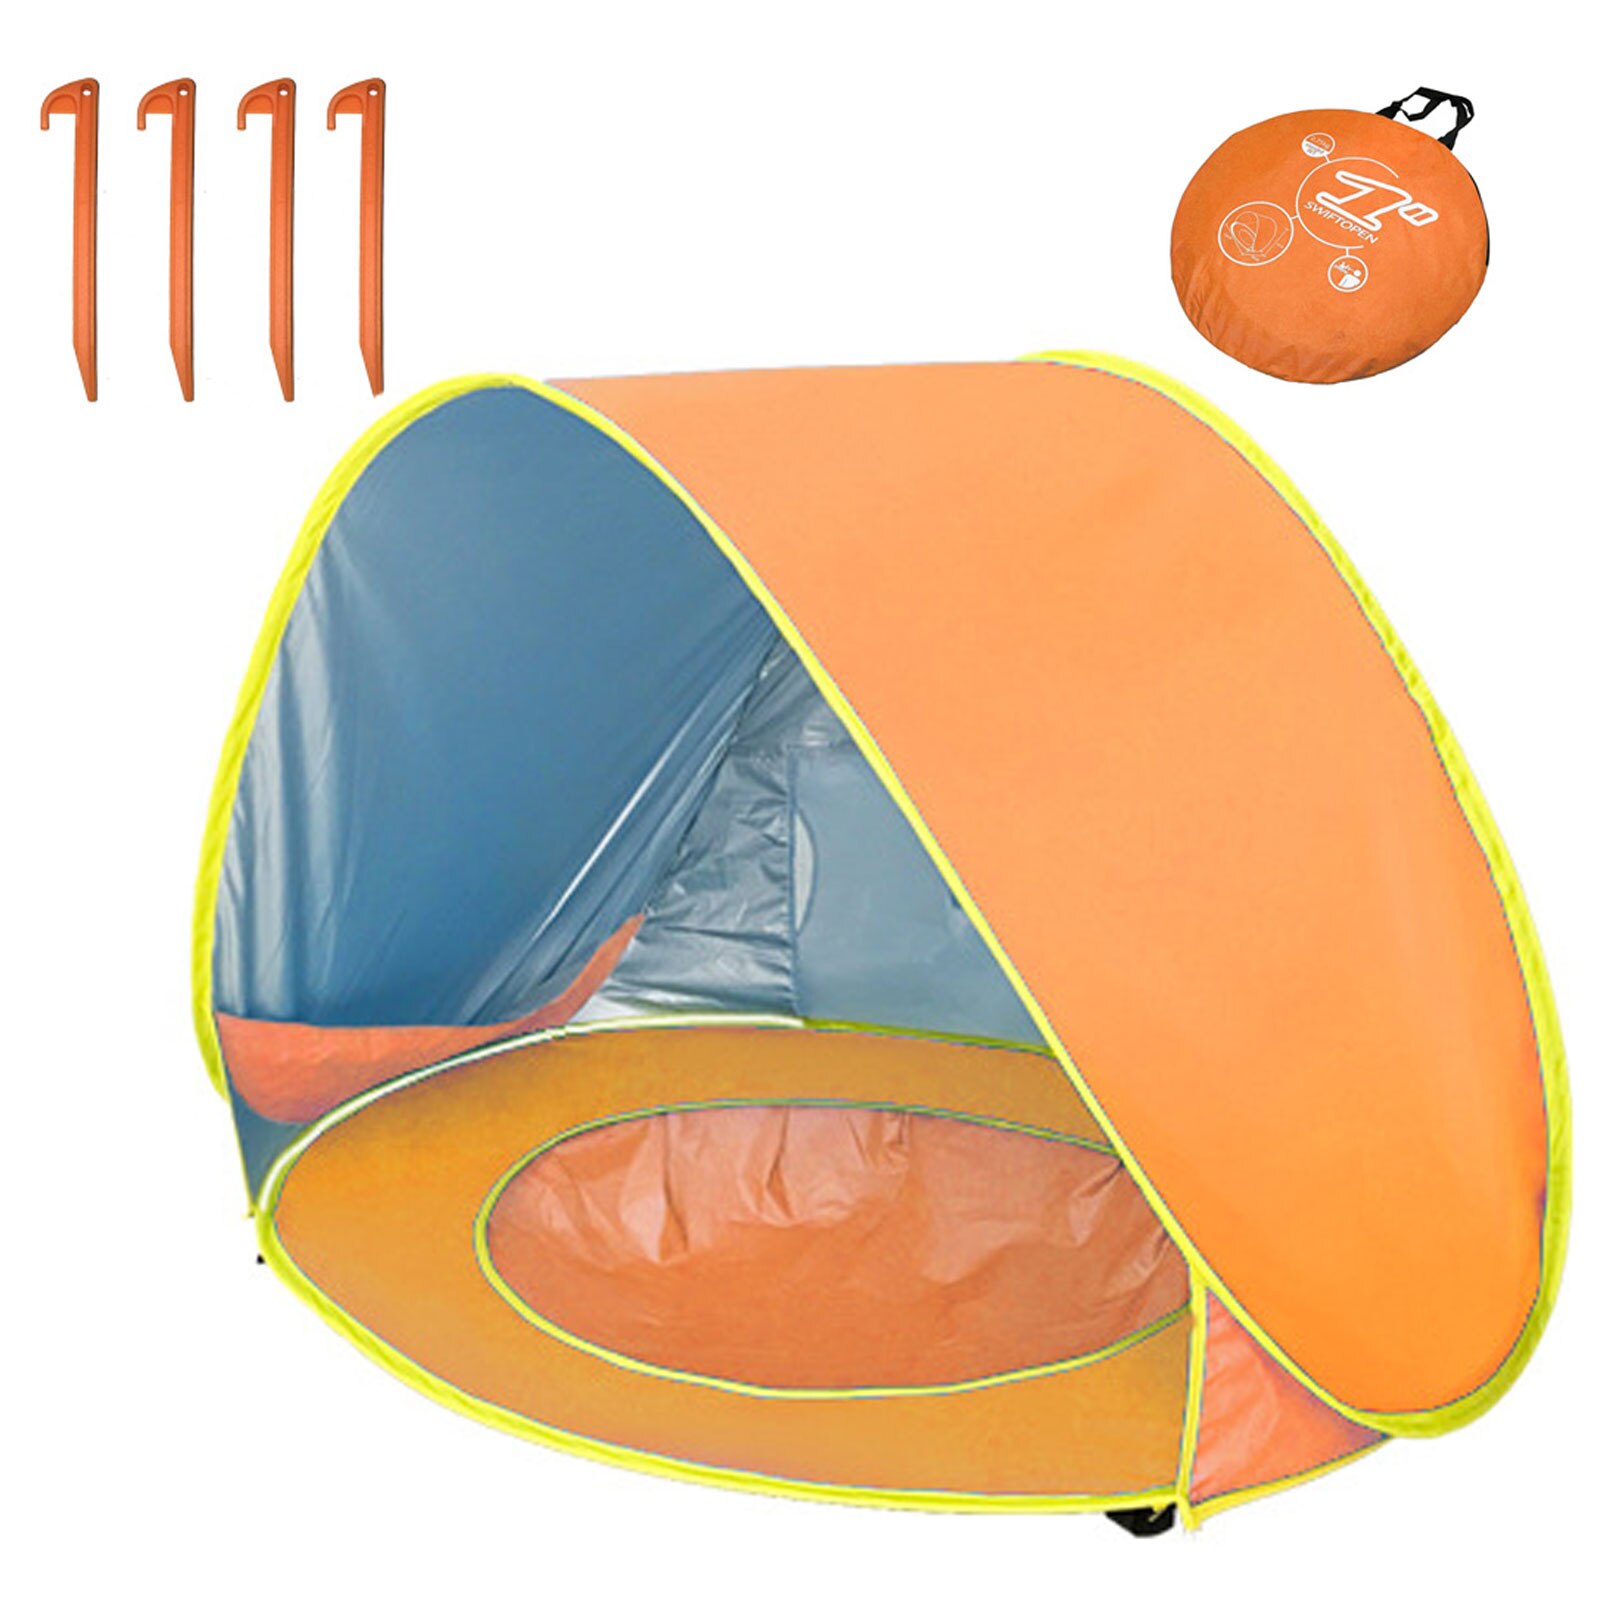 Cheap Goat Tents Baby Beach Tent Portable Shade Pool UV Protection Sun Shelter for Infant Outdoor Child Swimming Pool Game Play House Tent Toys